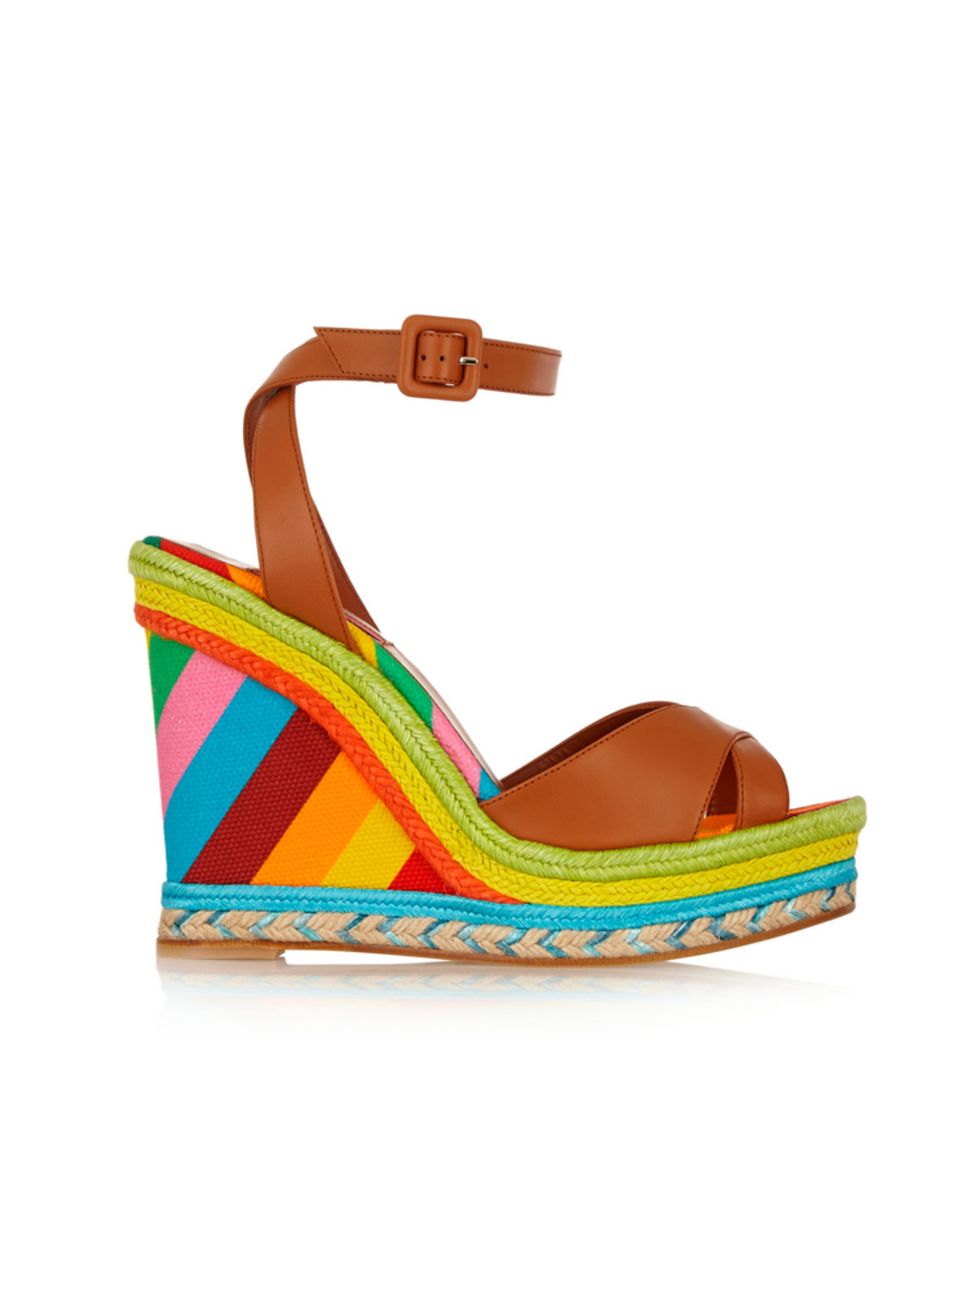 <p><a href="http://www.net-a-porter.com/product/507640/Valentino/printed-leather-raffia-and-canvas-wedge-sandals" target="_blank">Valentino</a> wedges, £340</p>